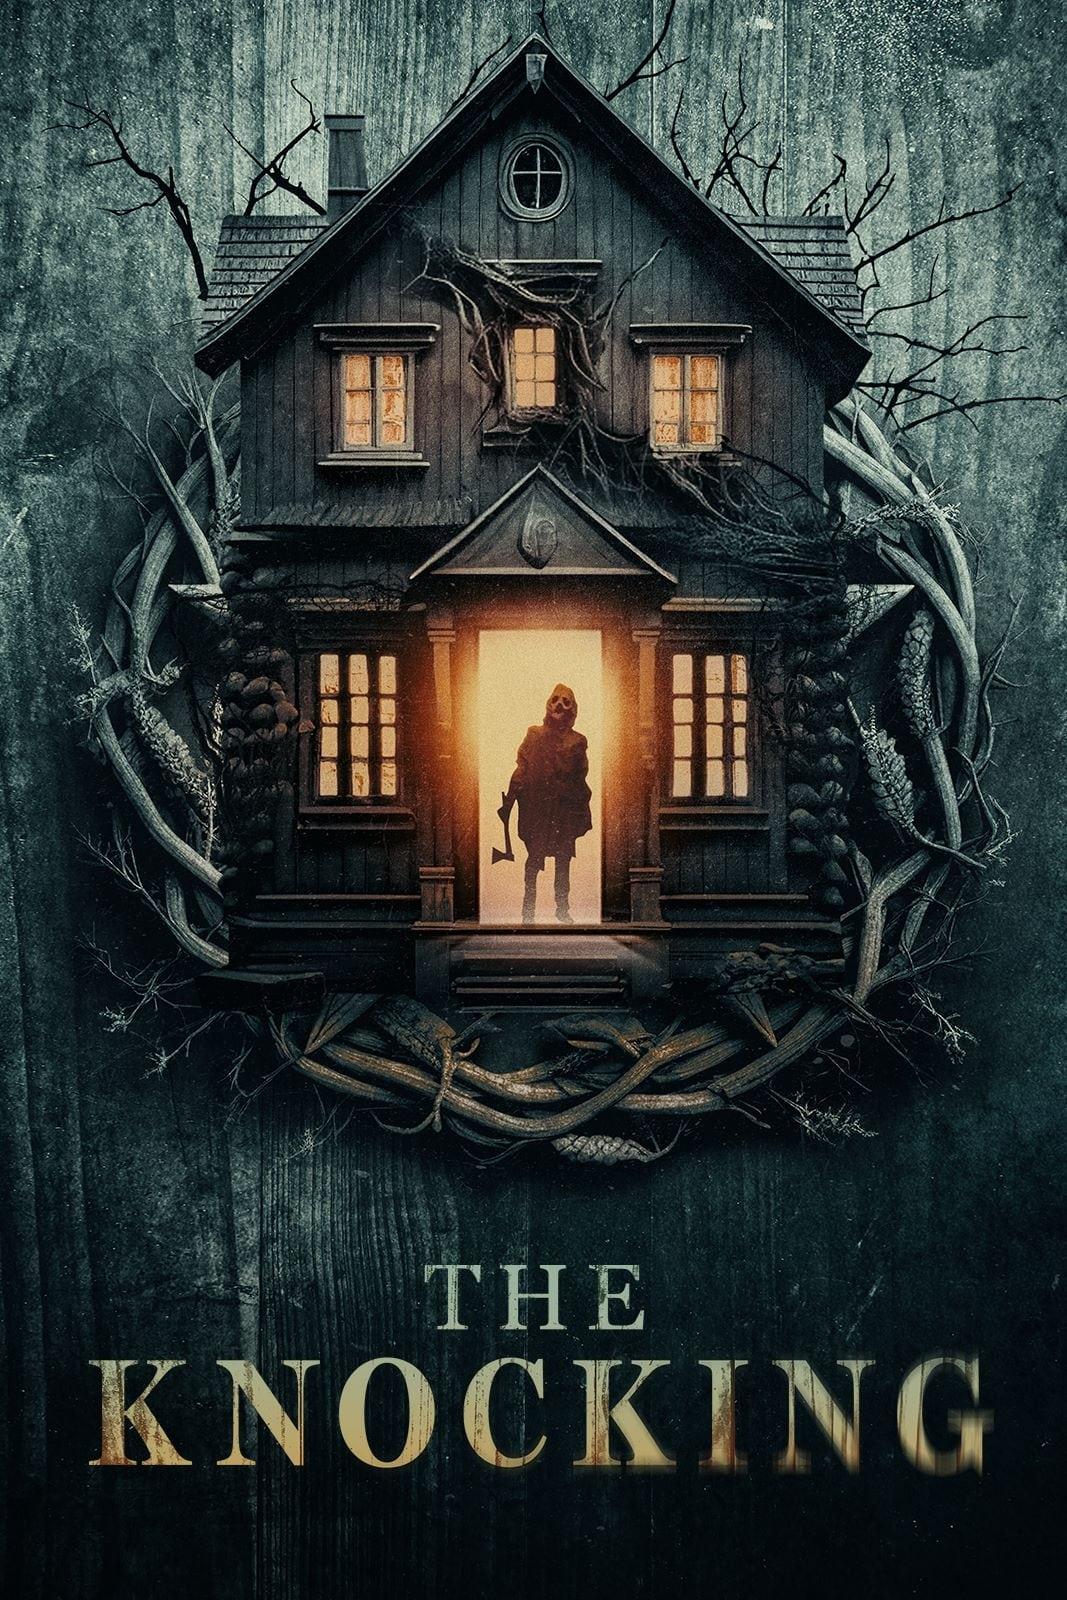 The Knocking poster